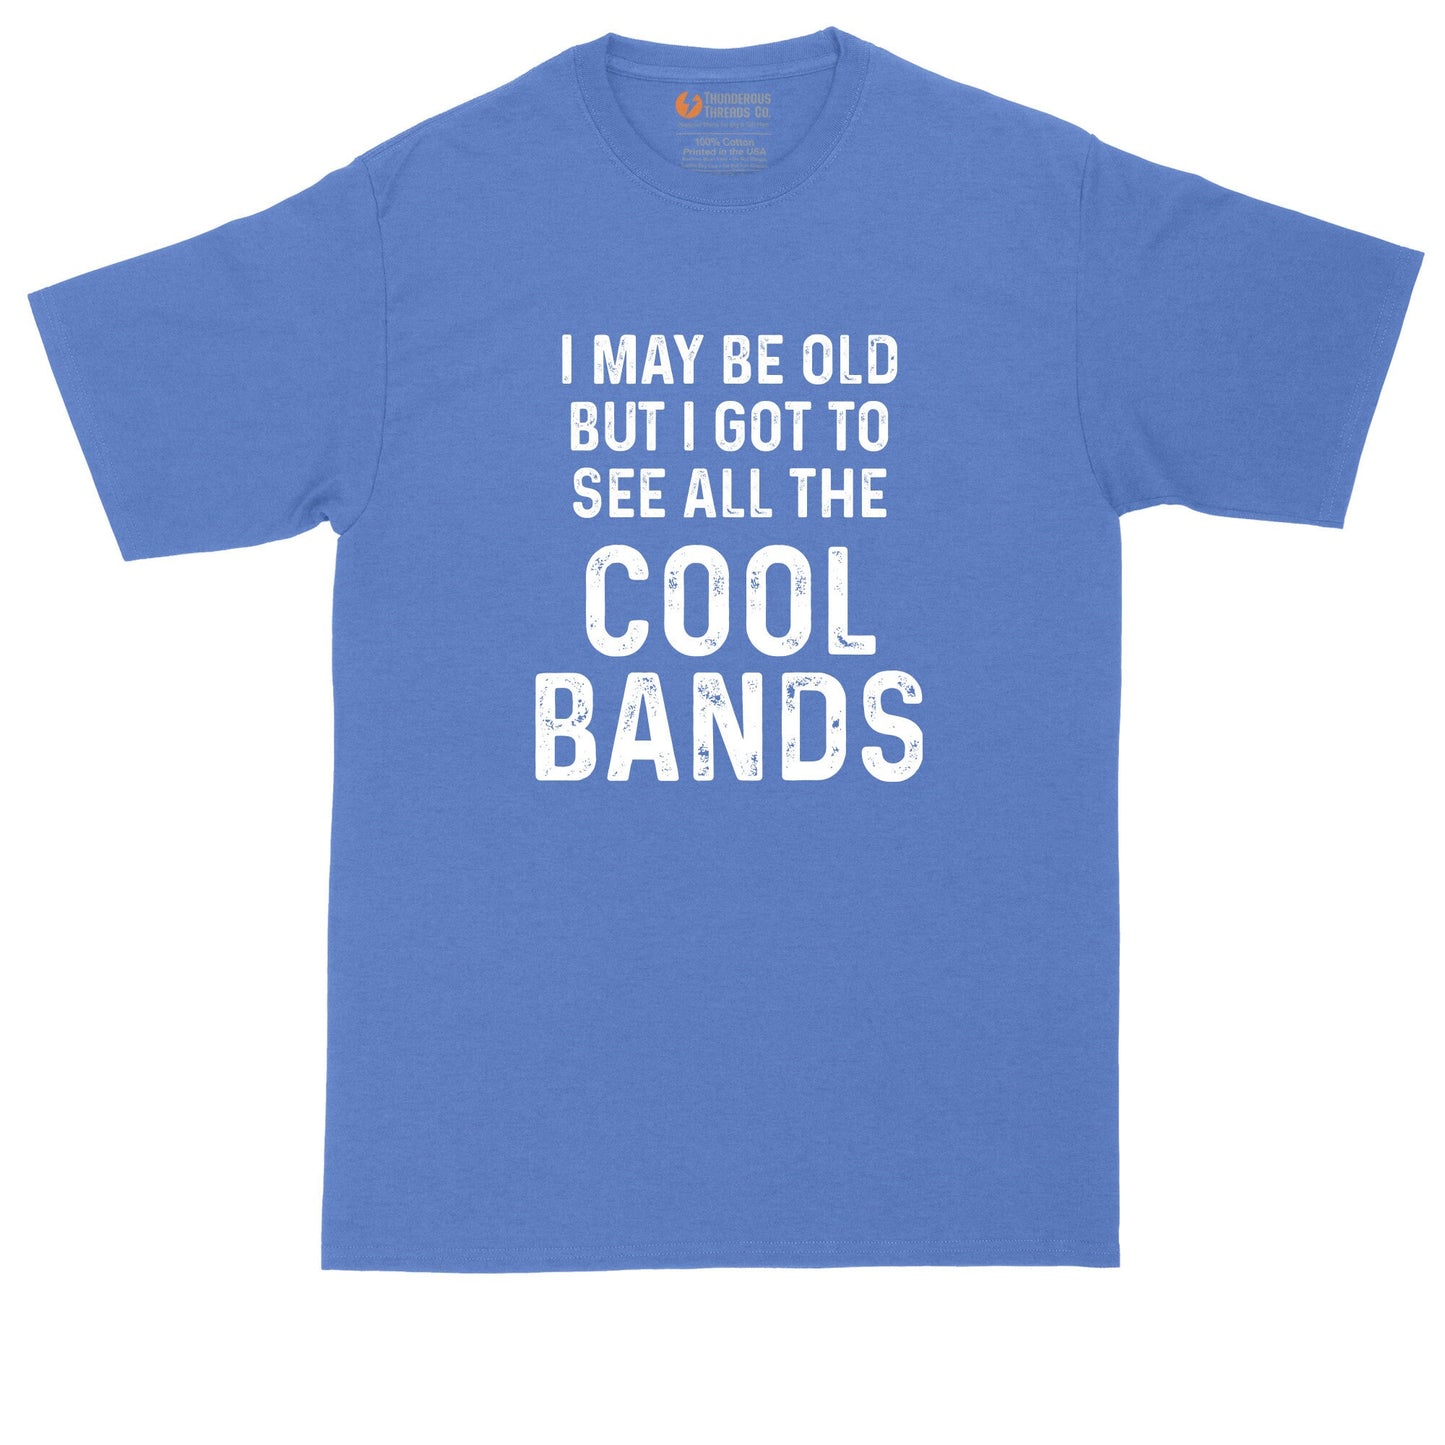 I May Be Old But I Got to See All the Cool Bands Version 2 | Mens Big and Tall T-Shirt | Concert T-Shirt | Music T-Shirt